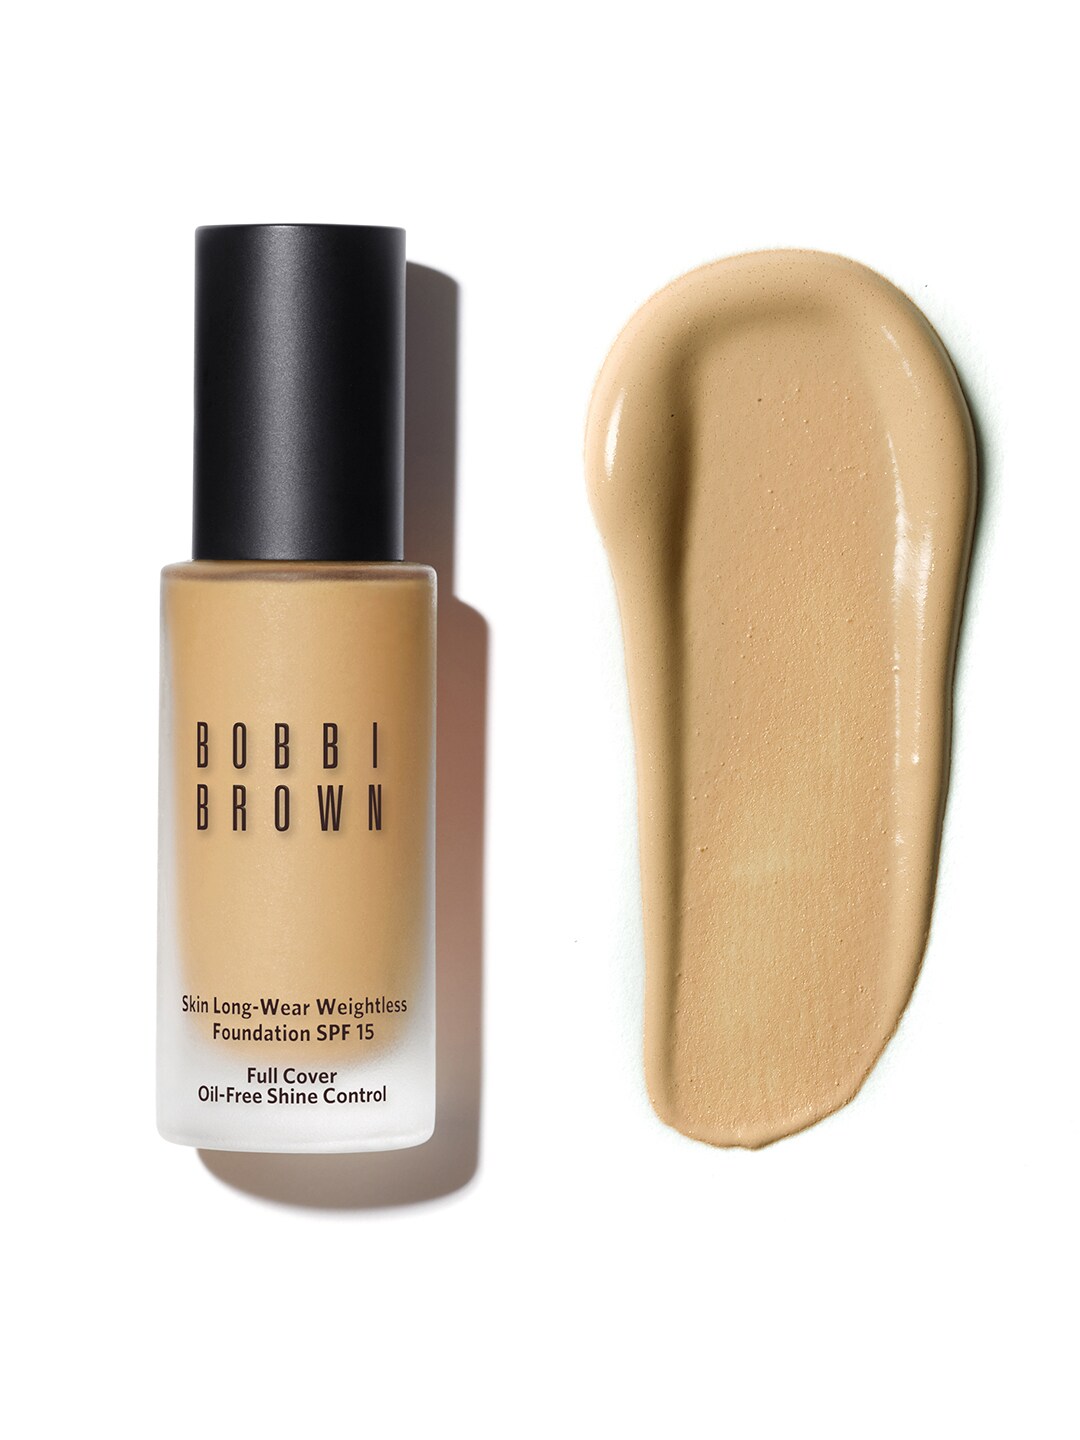 Bobbi Brown Skin Long-Wear Weightless Foundation with SPF 15 - Sand (N-032/2) 30ml Price in India